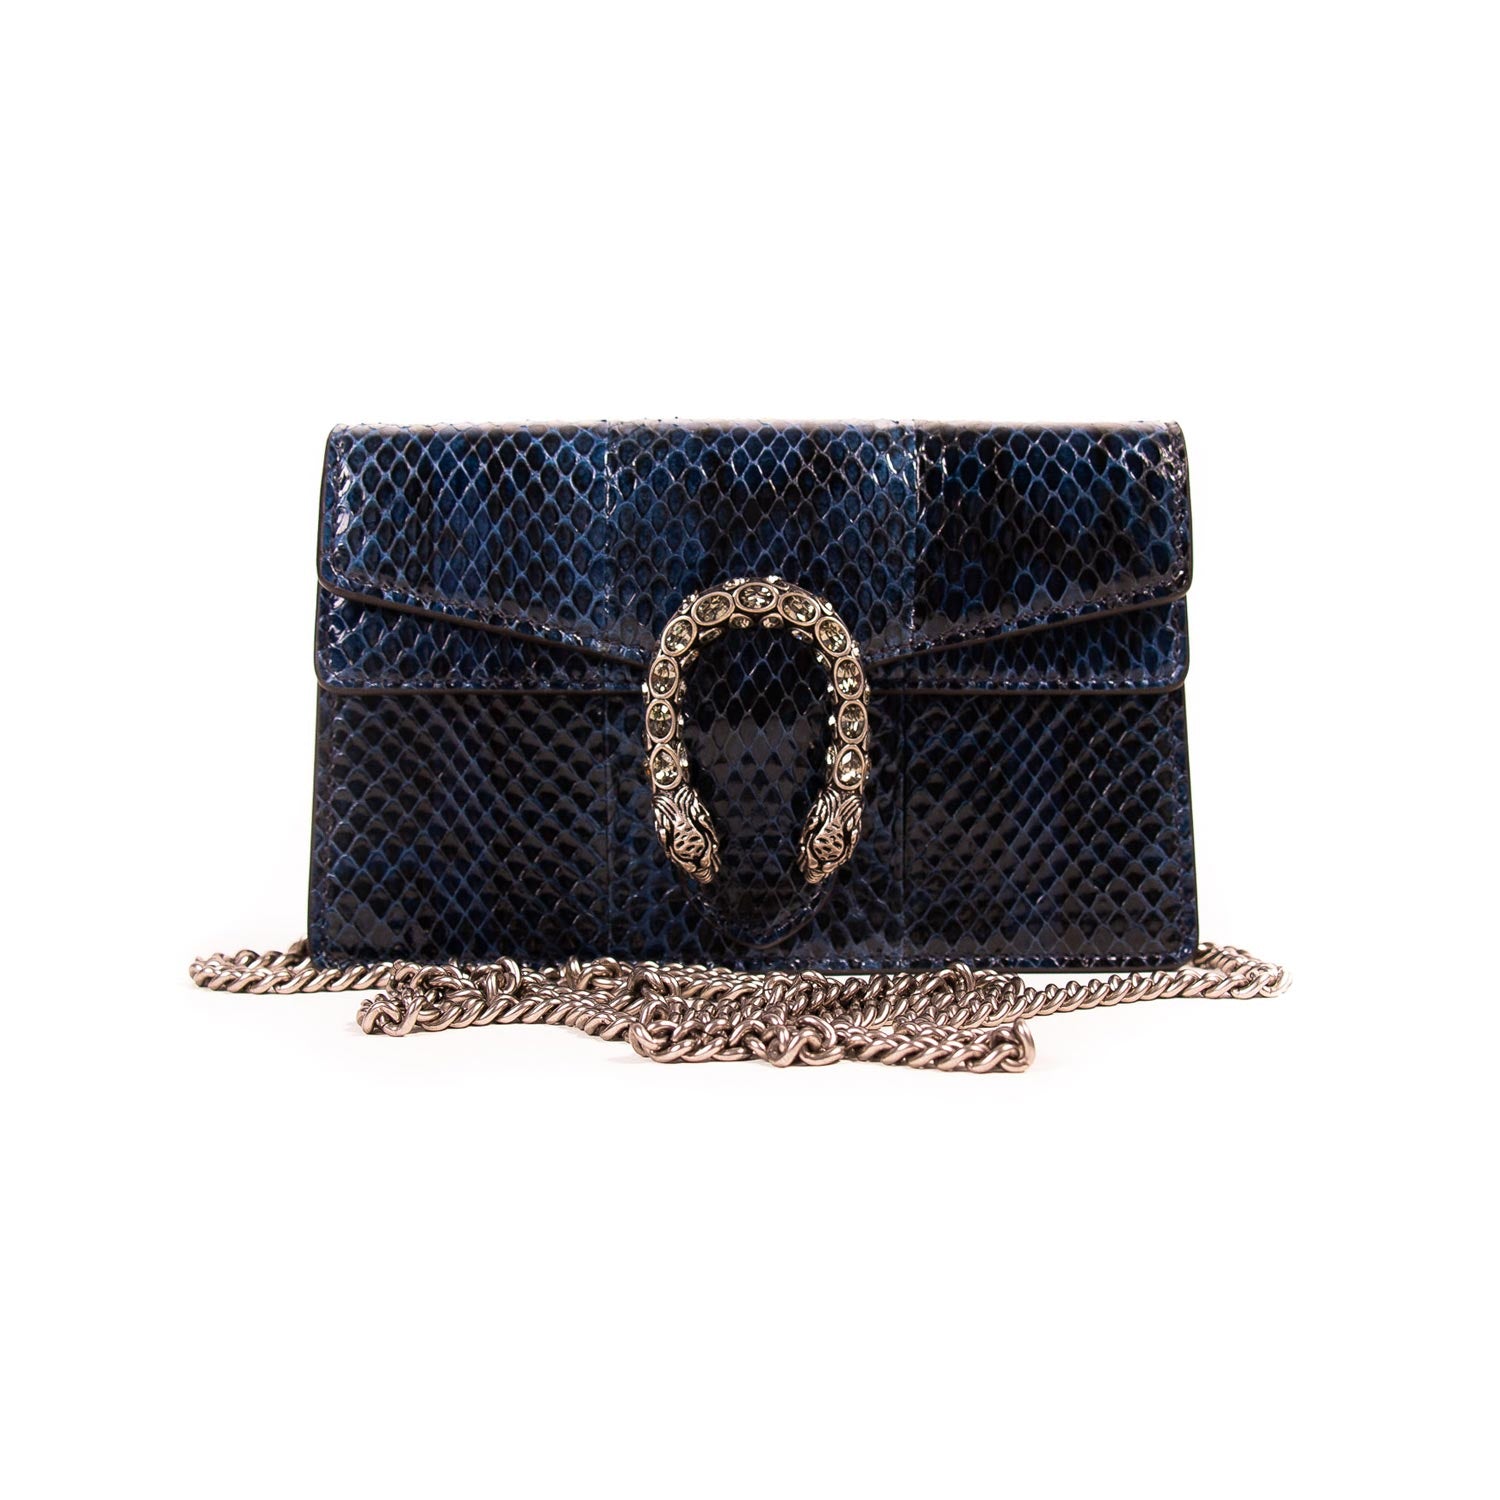 Iridescent Python Bag with Snake Head Accessory - Allysa Payne Beverly Hills